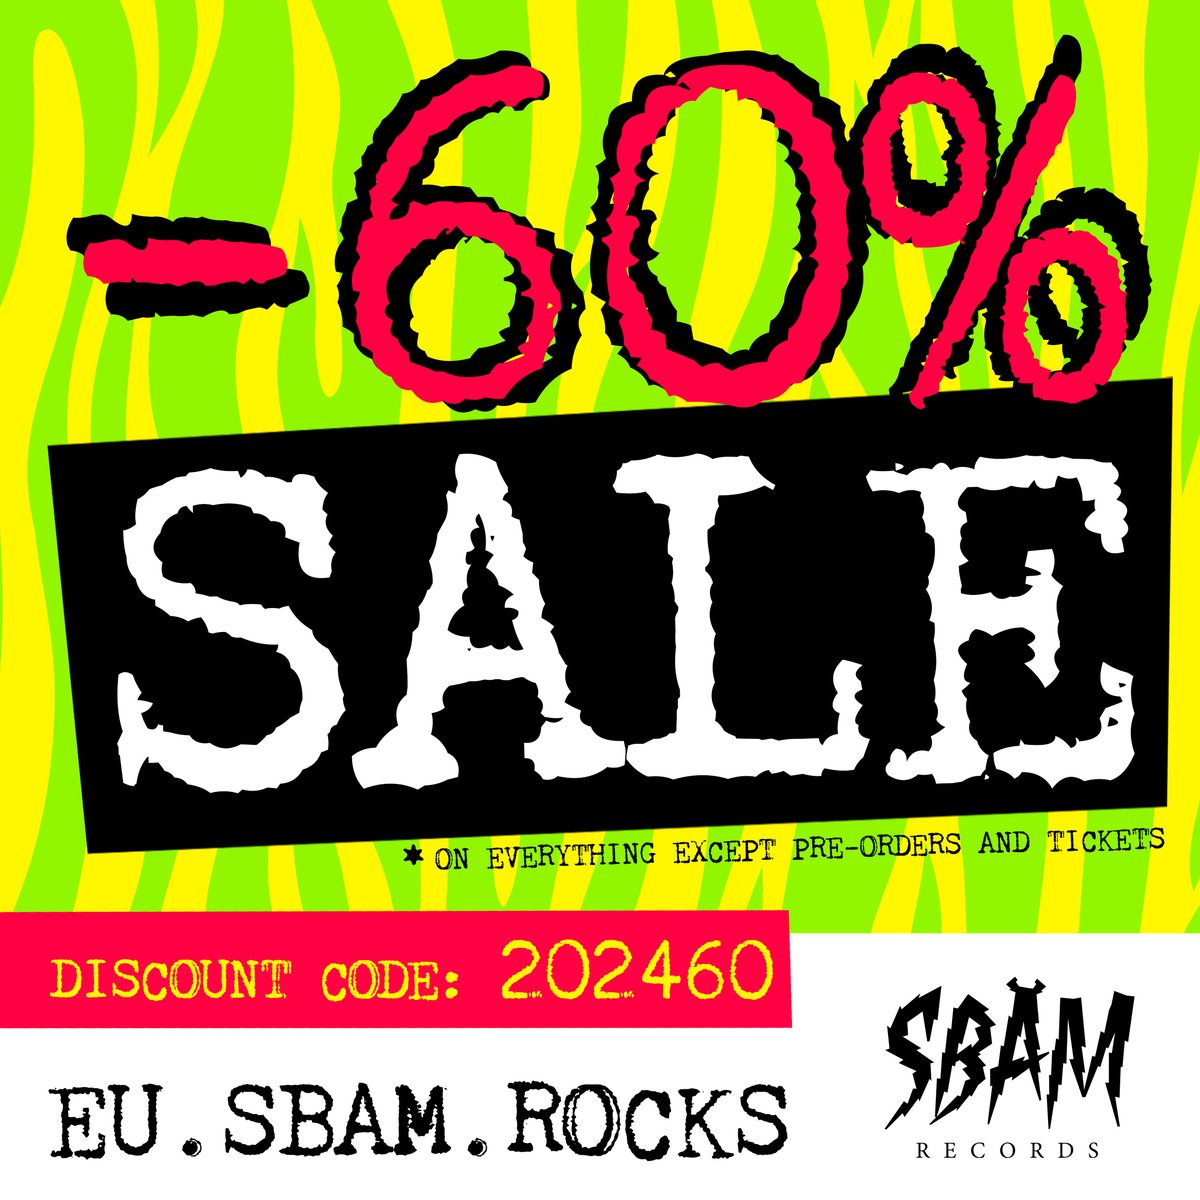 Here’s a little reminder for the EU (60%) and US SALE (50%). This crazy discount ends at the end of January. So better hurry up and grab some cheap stuff until it‘s gone. Spread the word. Thx!🤘 Europe 🇪🇺 folks: eu.sbam.rocks US 🇺🇸 folks: sbam-rocks.us